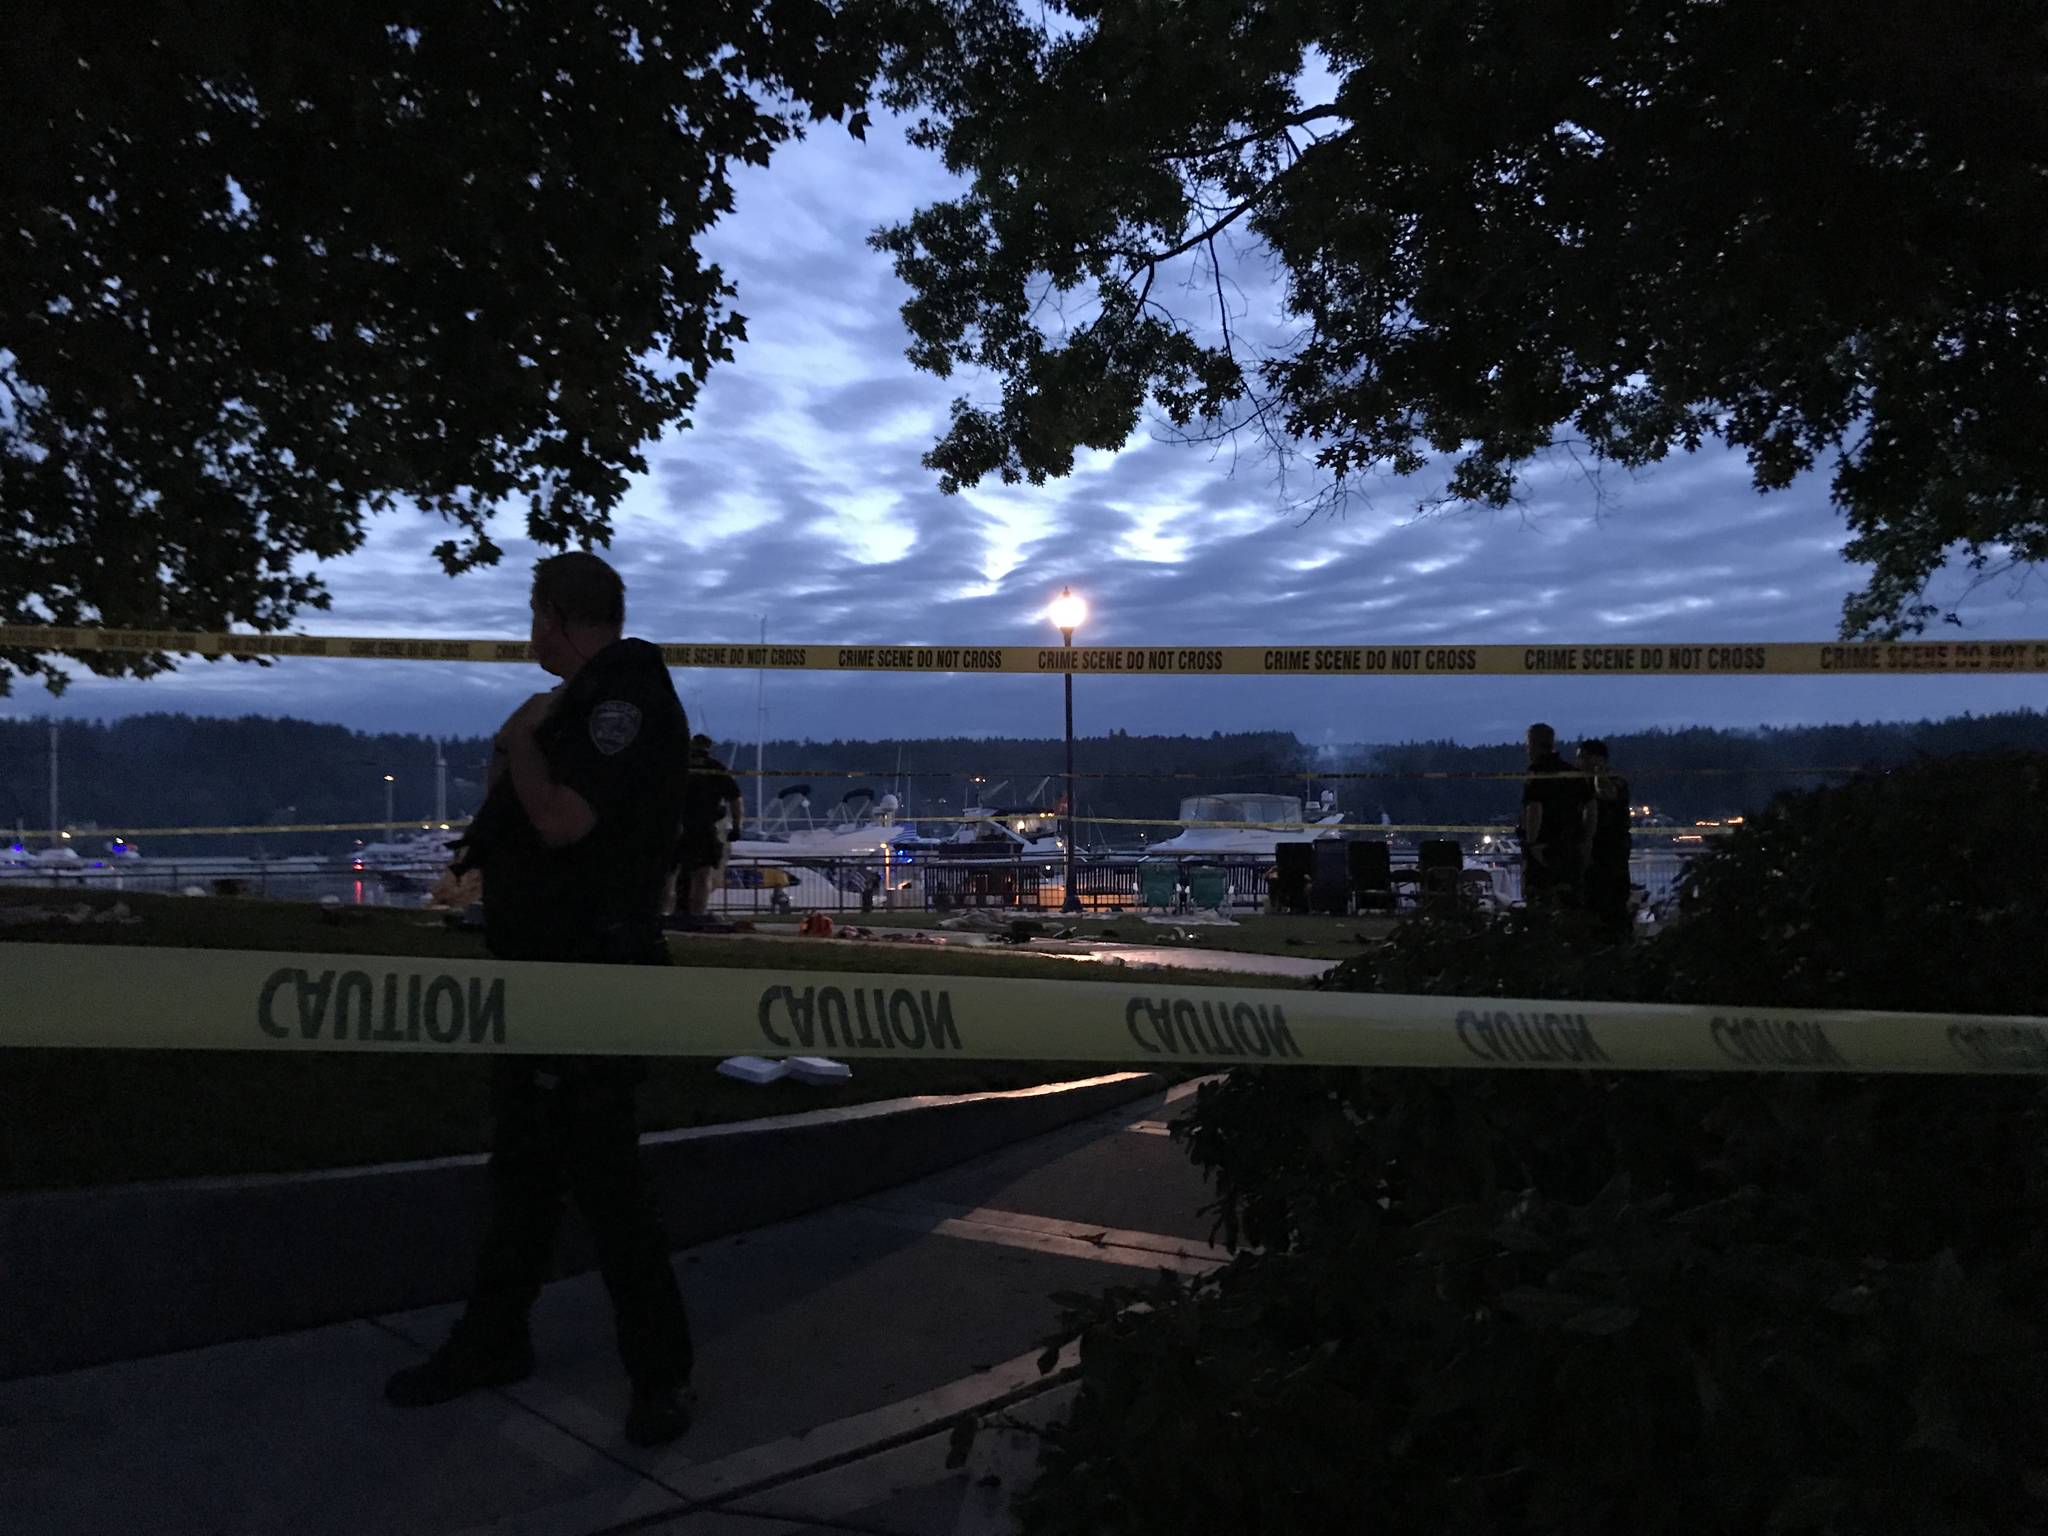 Update | One dead after officer-involved shooting in downtown Poulsbo